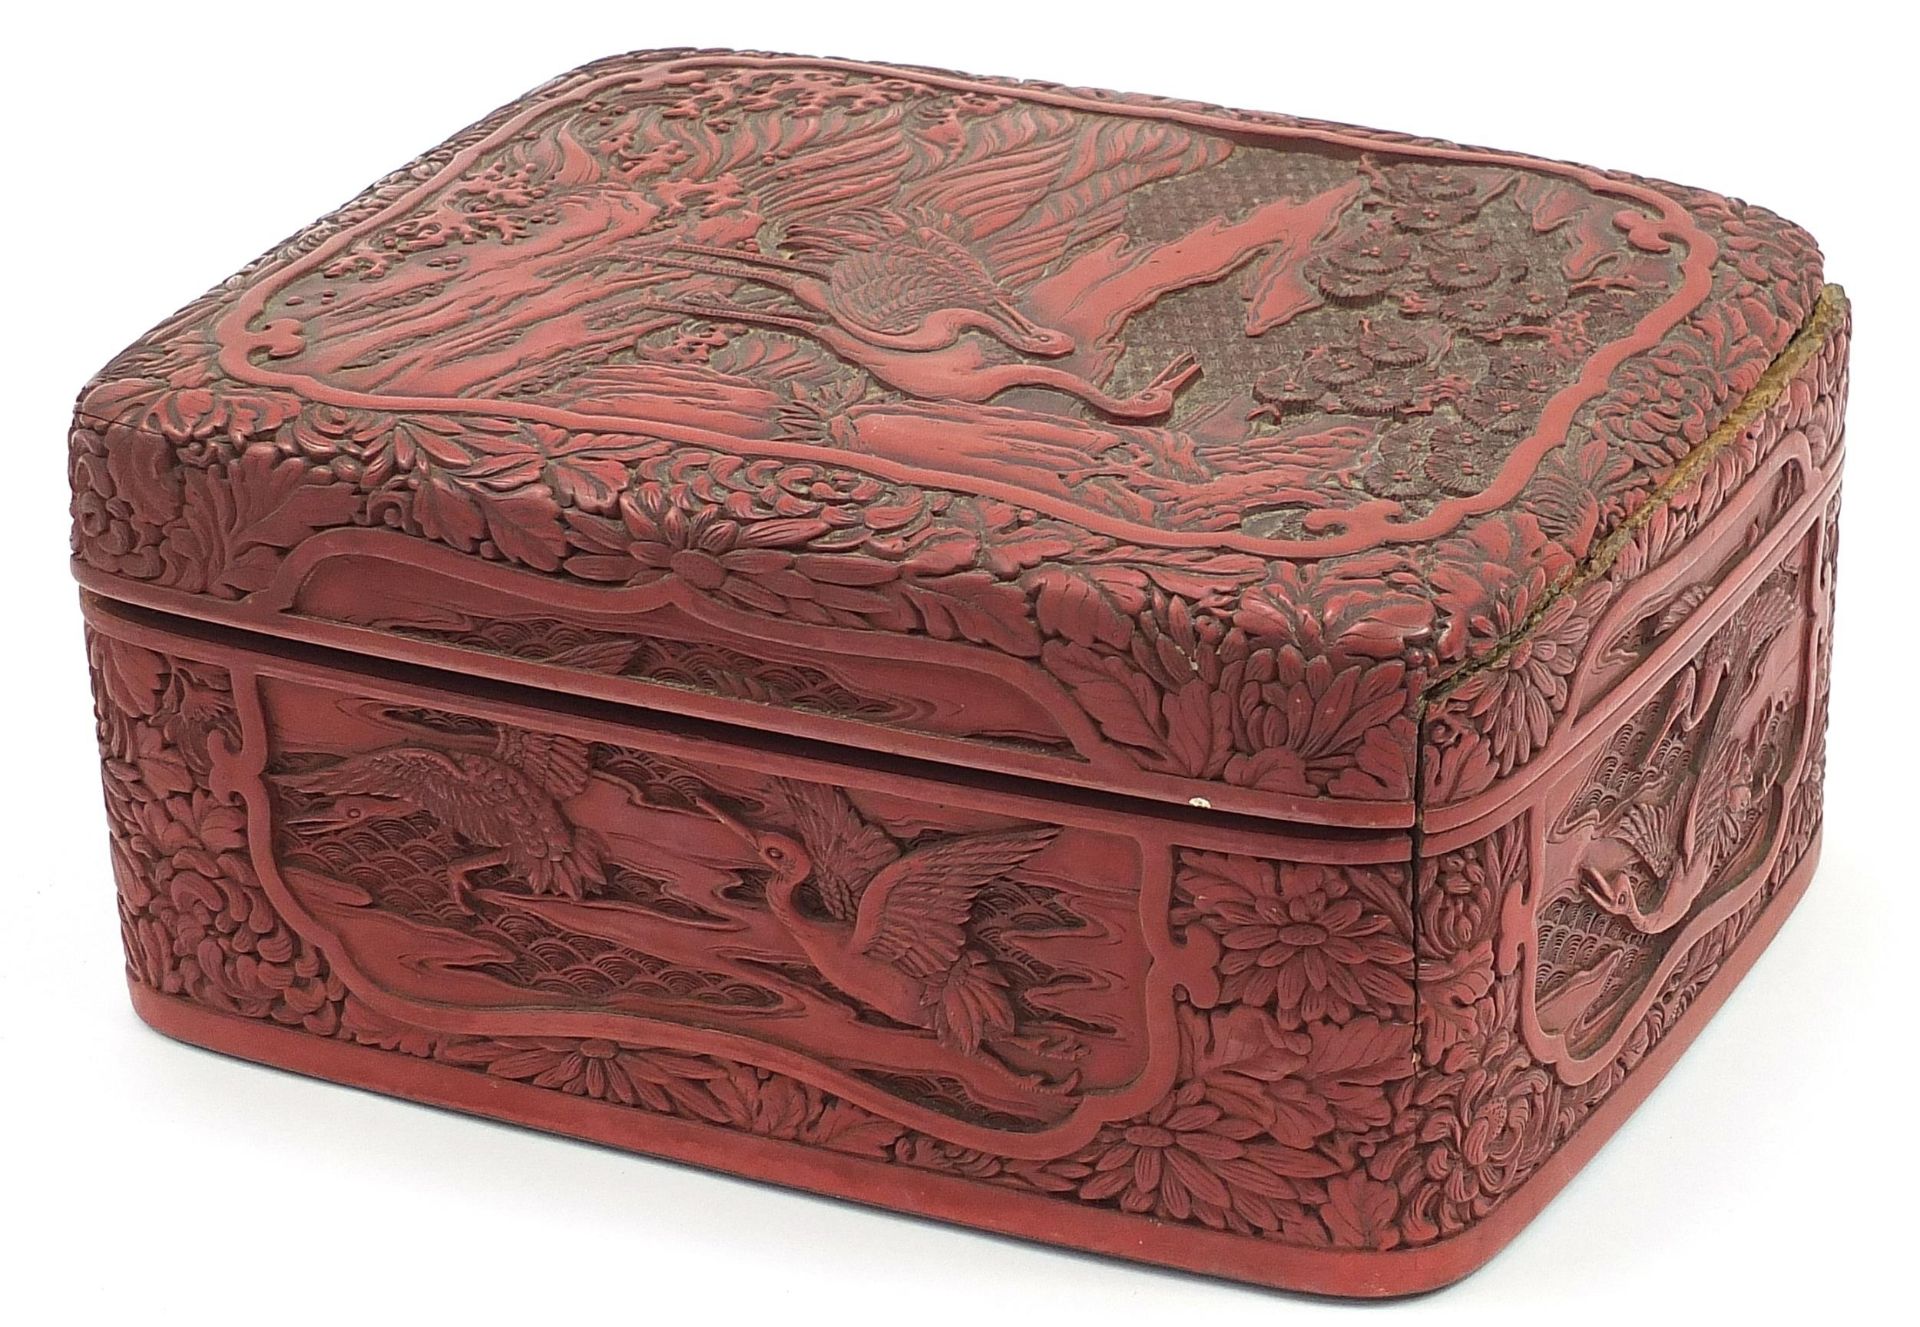 Large Chinese cinnabar lacquer box and cover carved with cranes in a landscape, 12cm H x 27.5cm W - Image 2 of 4